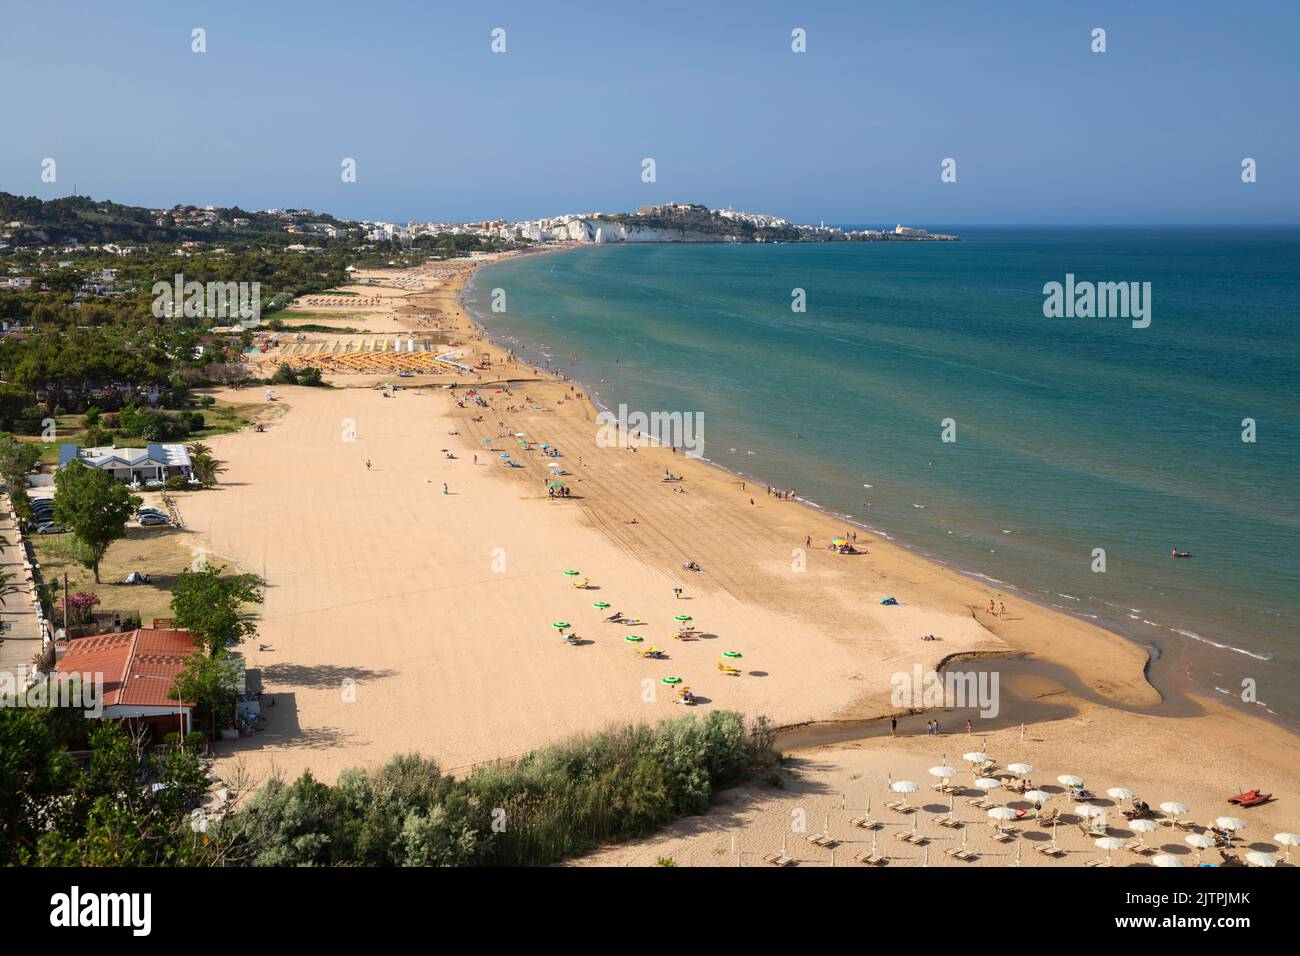 View along beach with the old town of Vieste in distance, Vieste, Apulia, Italy Stock Photo